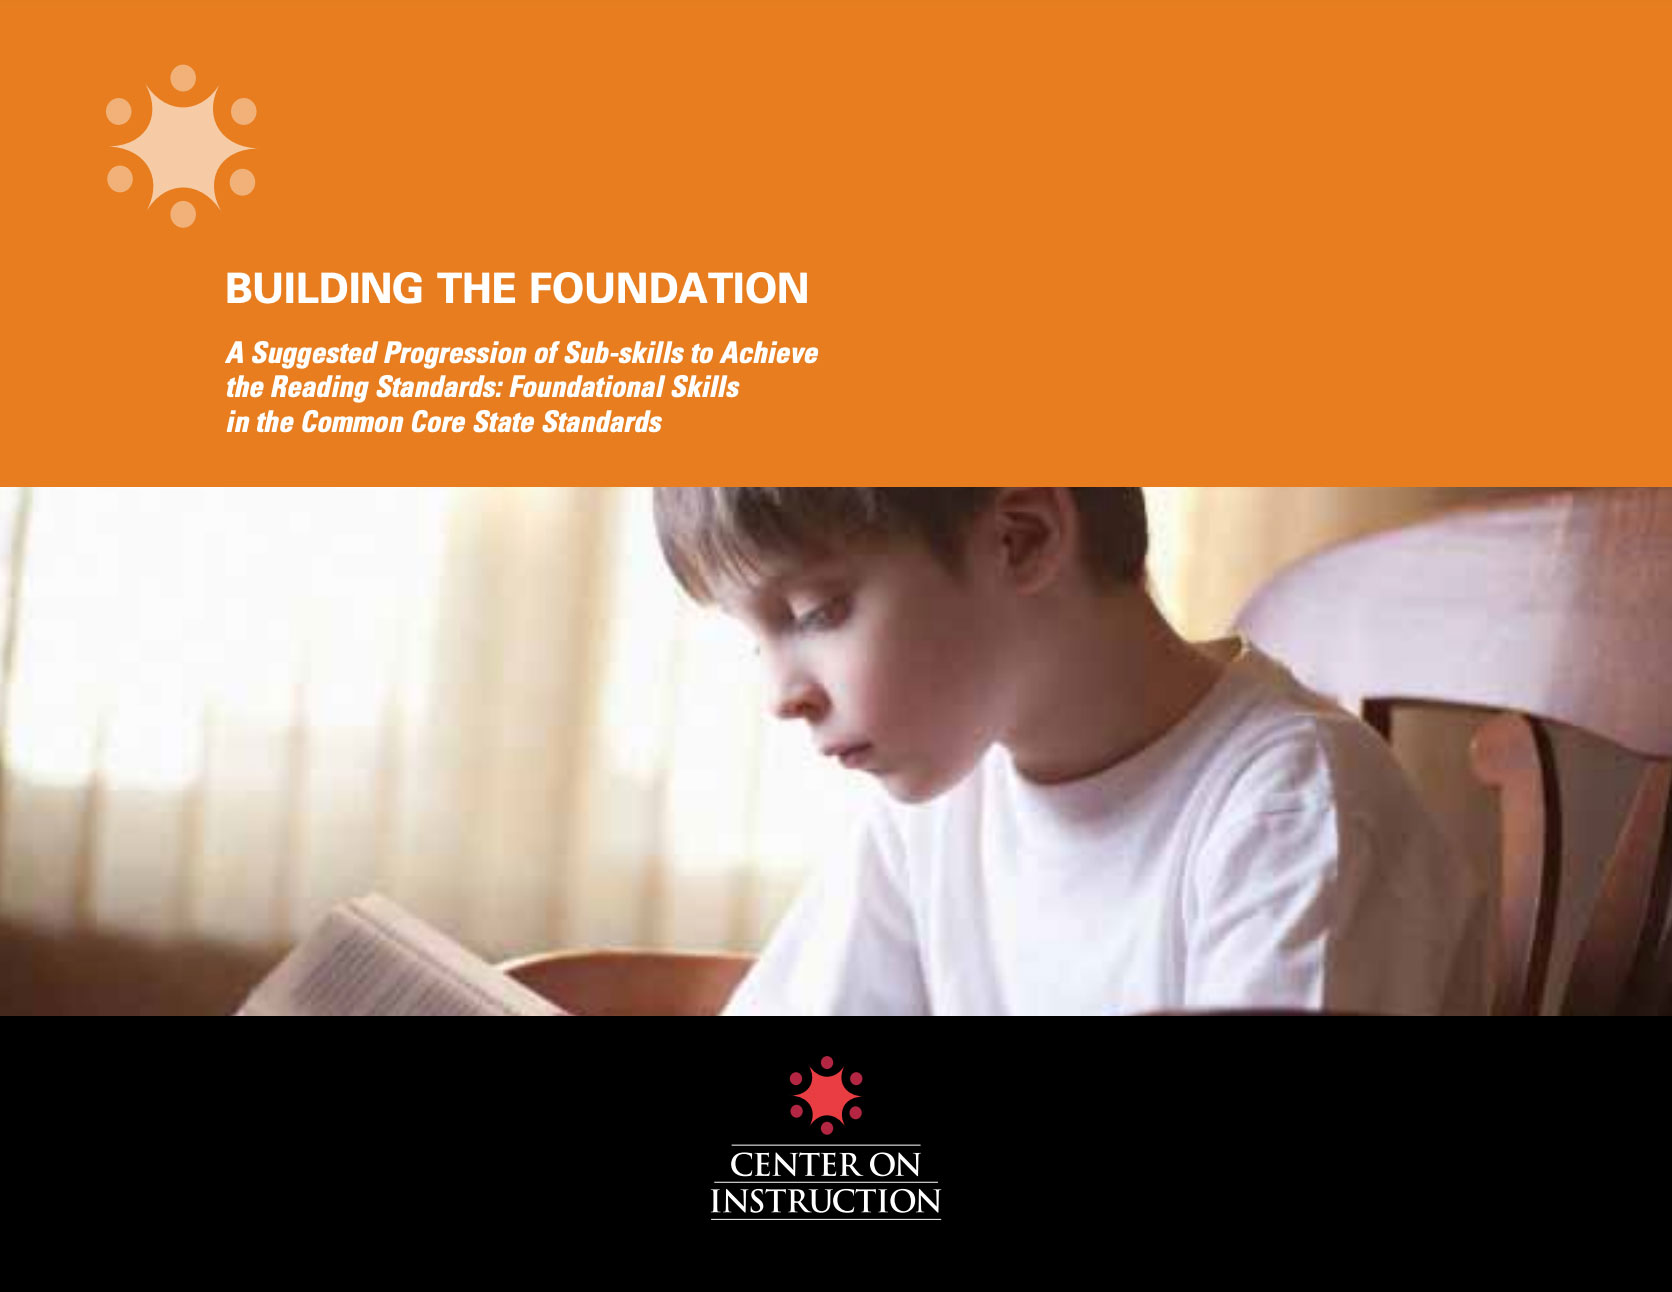 Building the Foundation: A Suggested Progression of Sub-skills to Achieve the Reading Standards: Foundational Skills in the Common Core State Standards